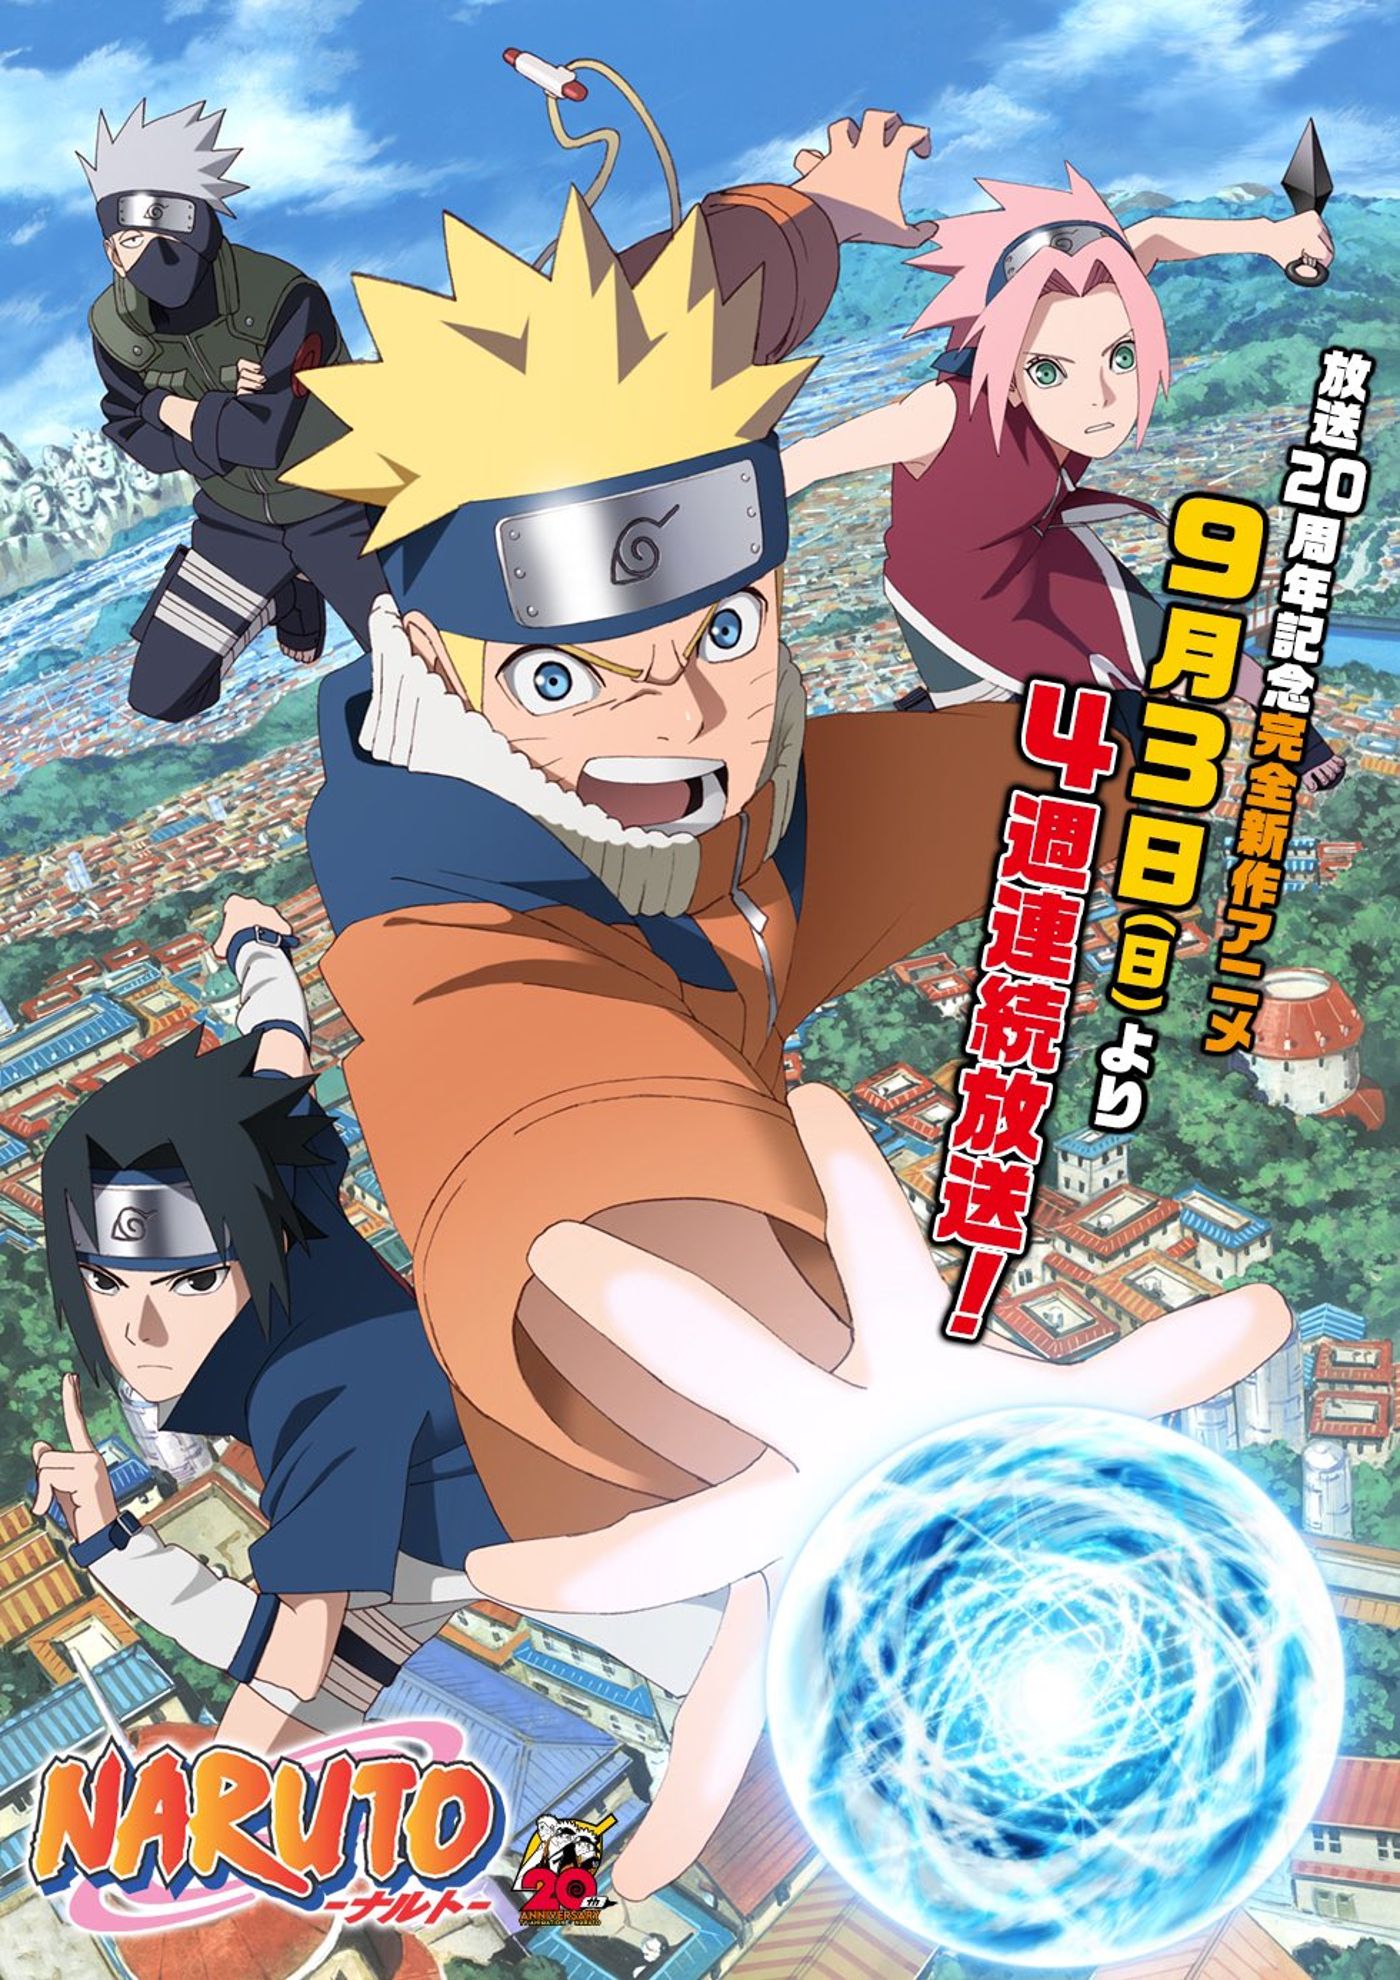 Naruto Was Supposed to Return With 4 New Episodes… So Where is it?